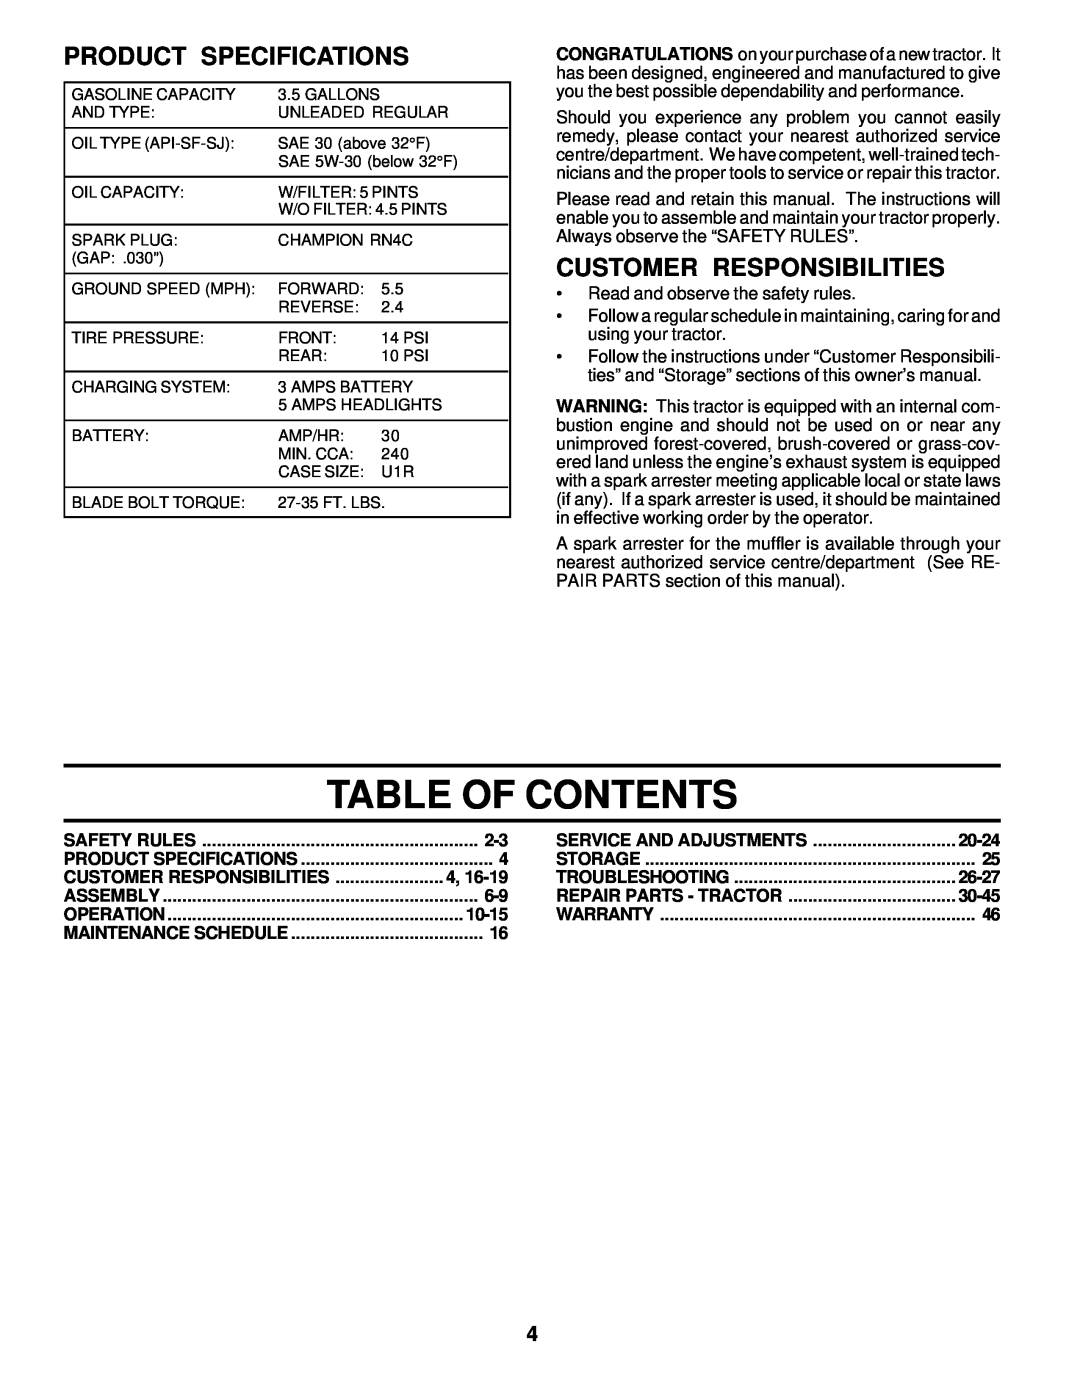 Weed Eater 178277 owner manual Table Of Contents, Product Specifications, Customer Responsibilities 